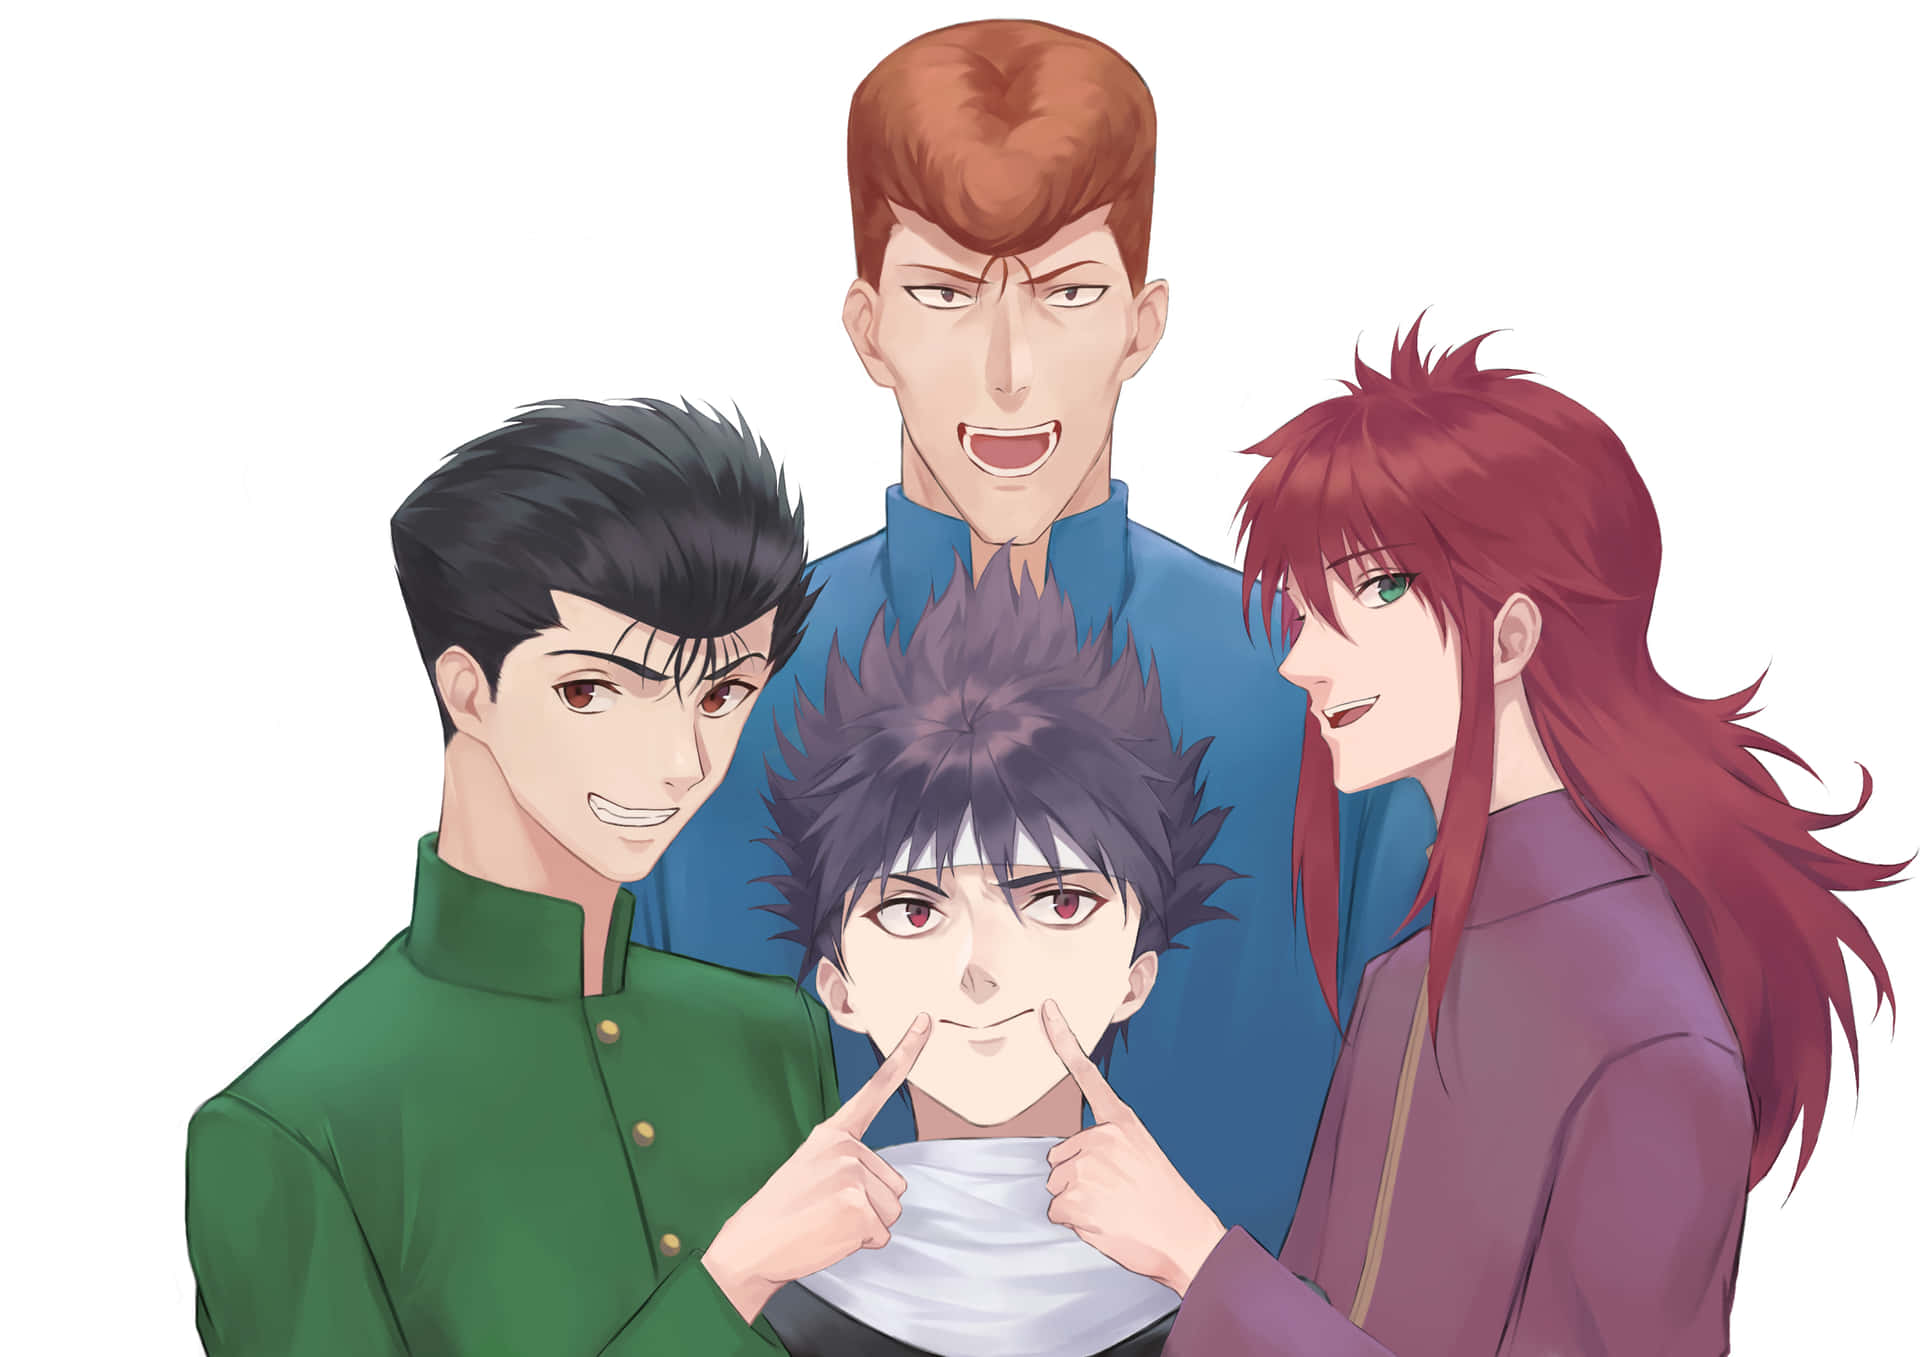 Growing up as a ghost fighter in the YuYu Hakusho universe